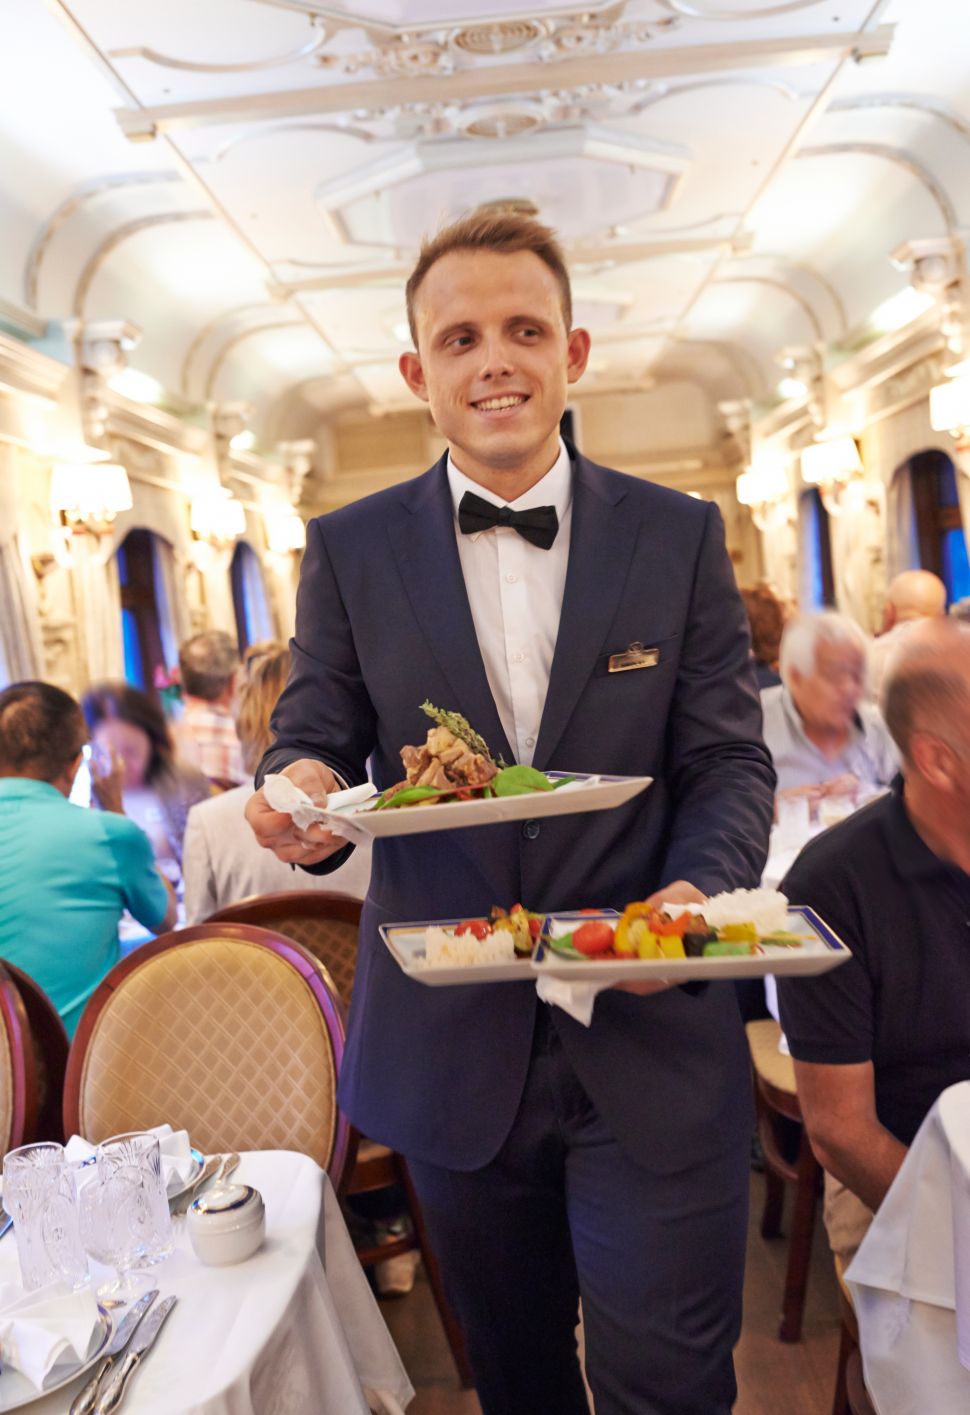 This train's dining car is probably more elegant than the last restaurant you ate at.